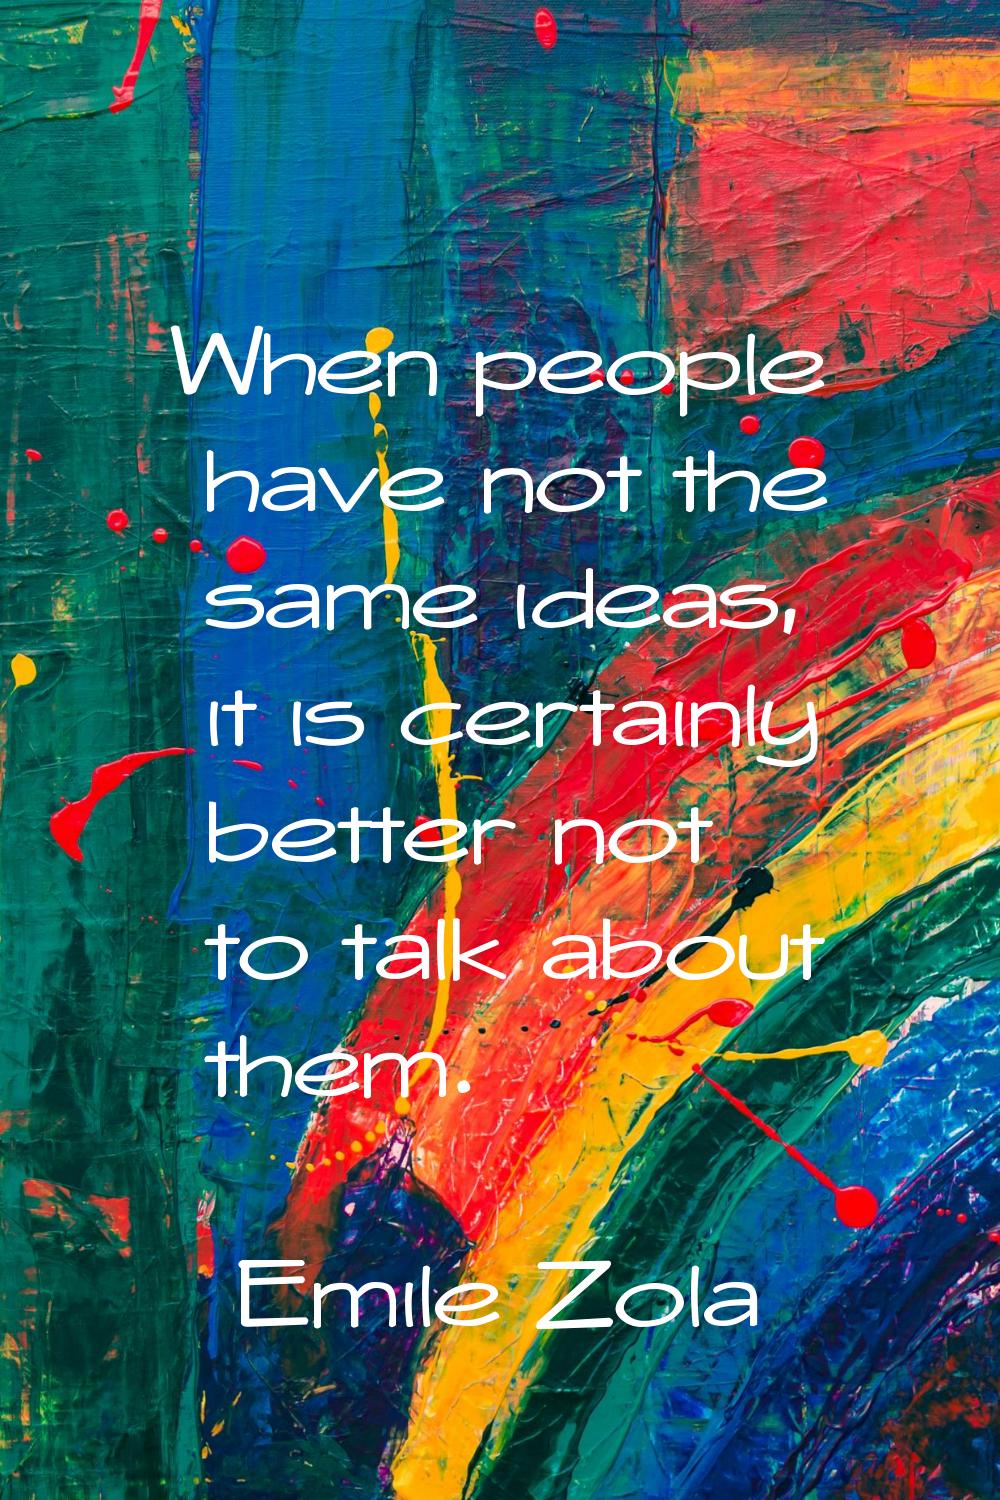 When people have not the same ideas, it is certainly better not to talk about them.